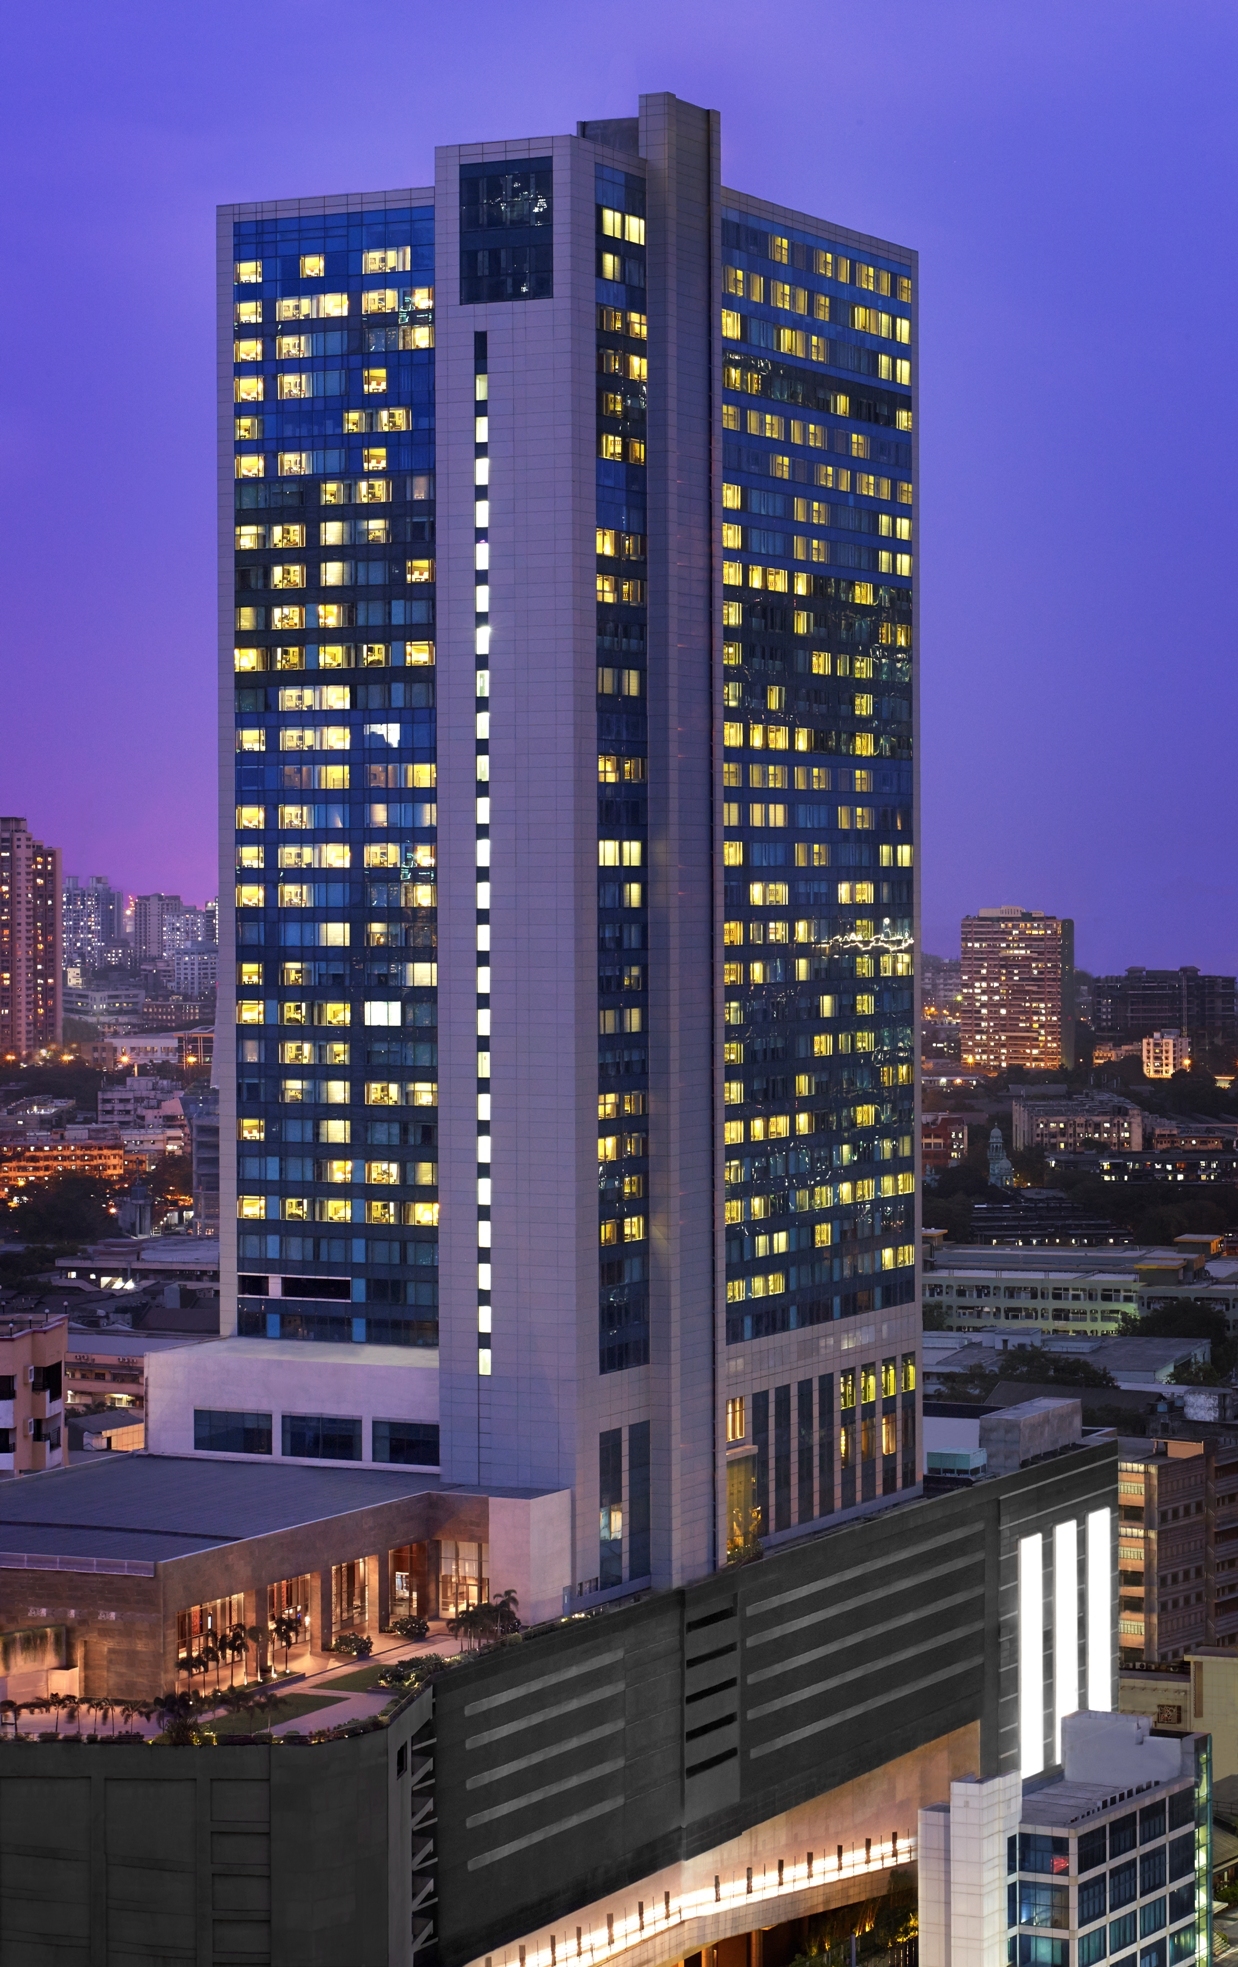 St Regis Hotels And Resorts To Debut In India With The St Regis Mumbai Business Wire